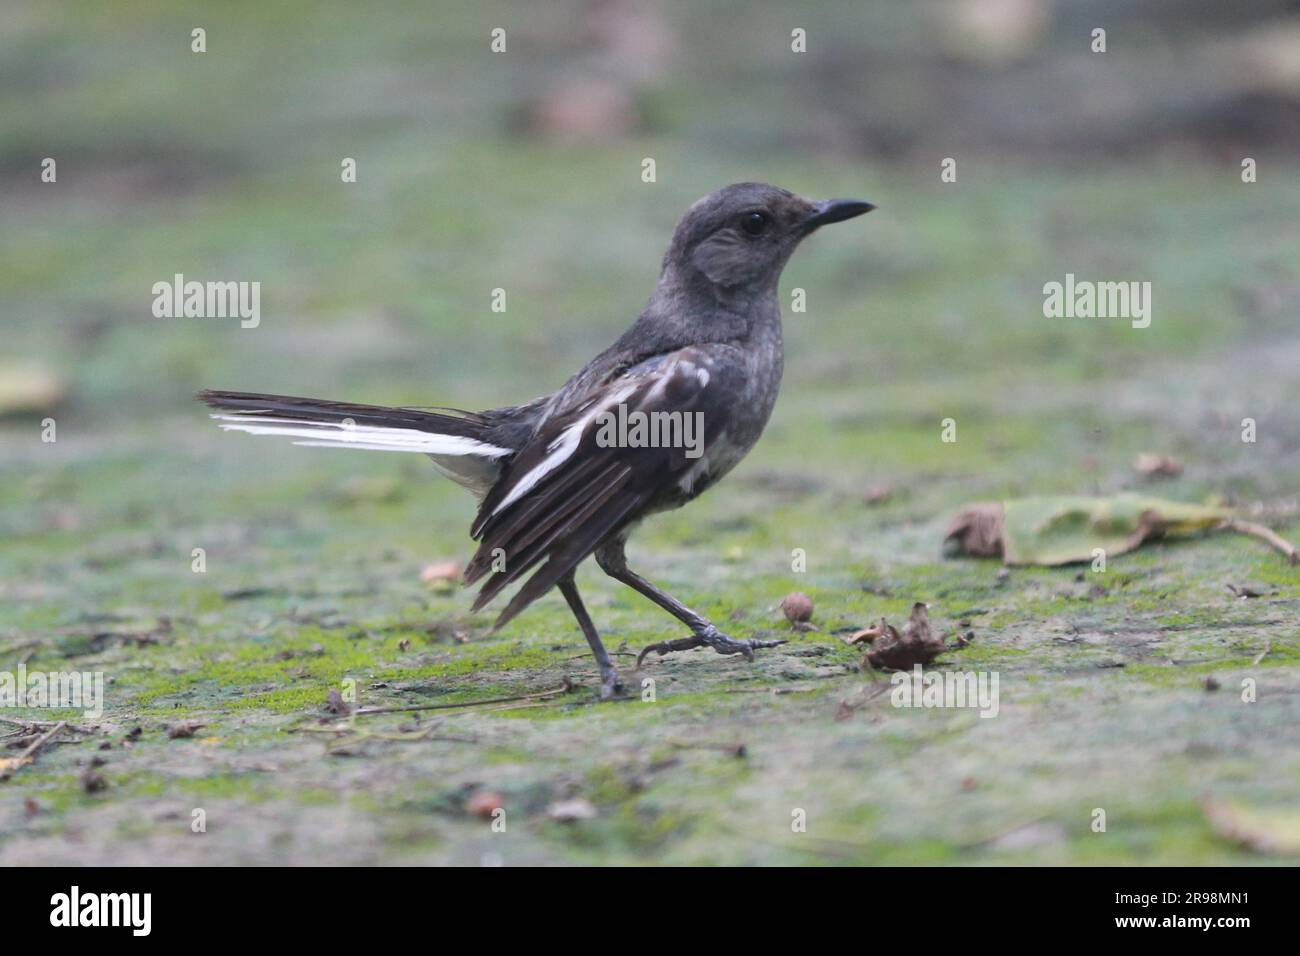 The National Bird of Bangladesh is the Oriental Magpie-Robin. They are commonly known as Doyel or Doel (Bengali: দোয়েল) and are One of the most beaut Stock Photo